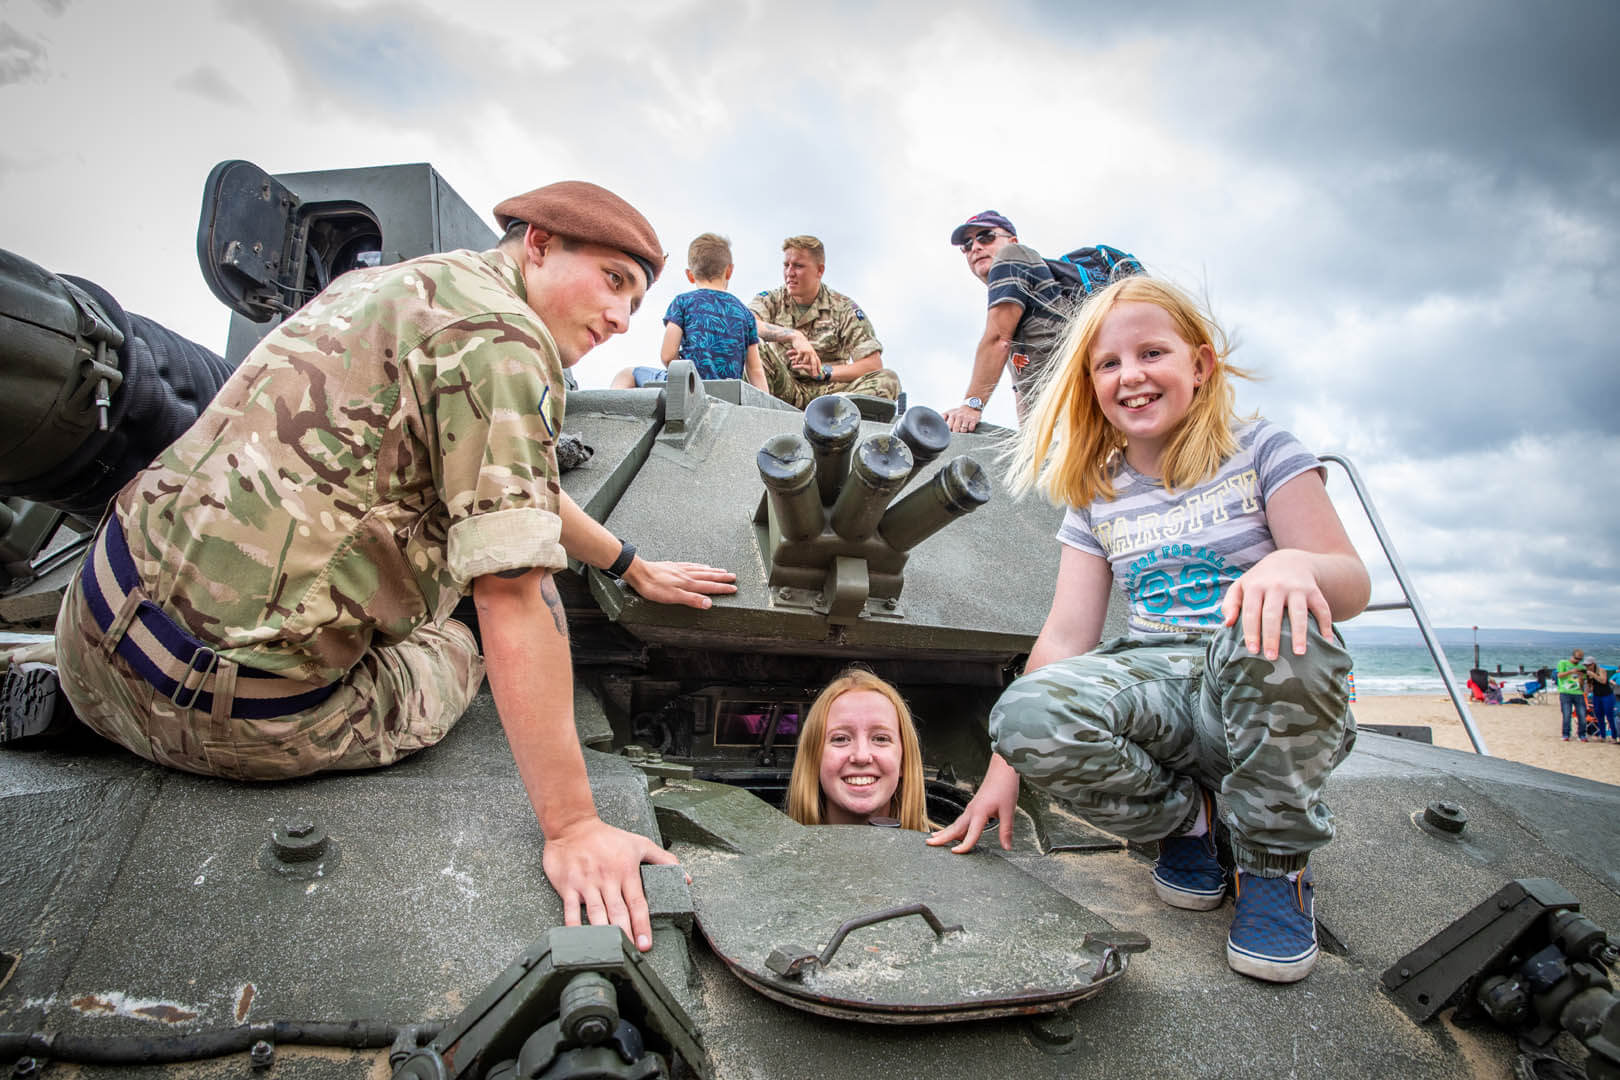 Two girls exploring the tank with a British soldier at the Bournemouth Air festival